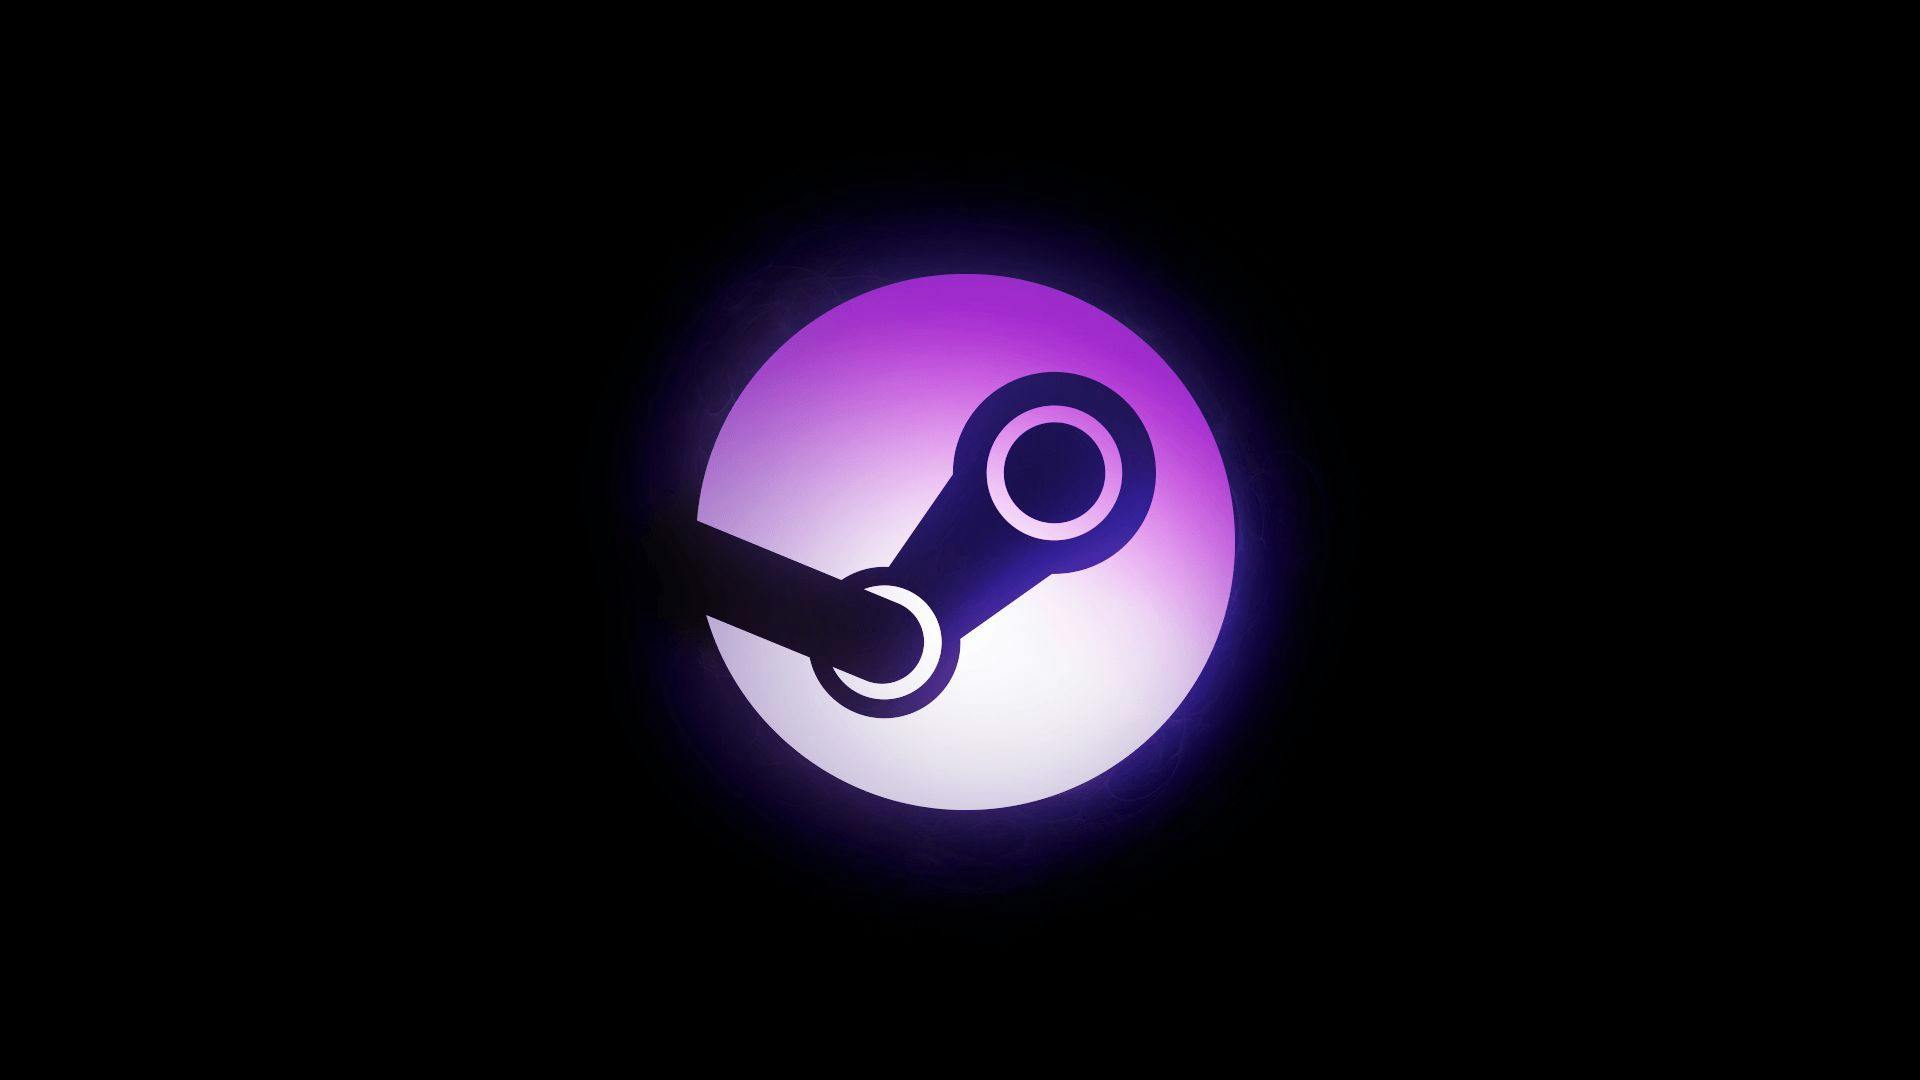 These are the year's top selling Steam games so far